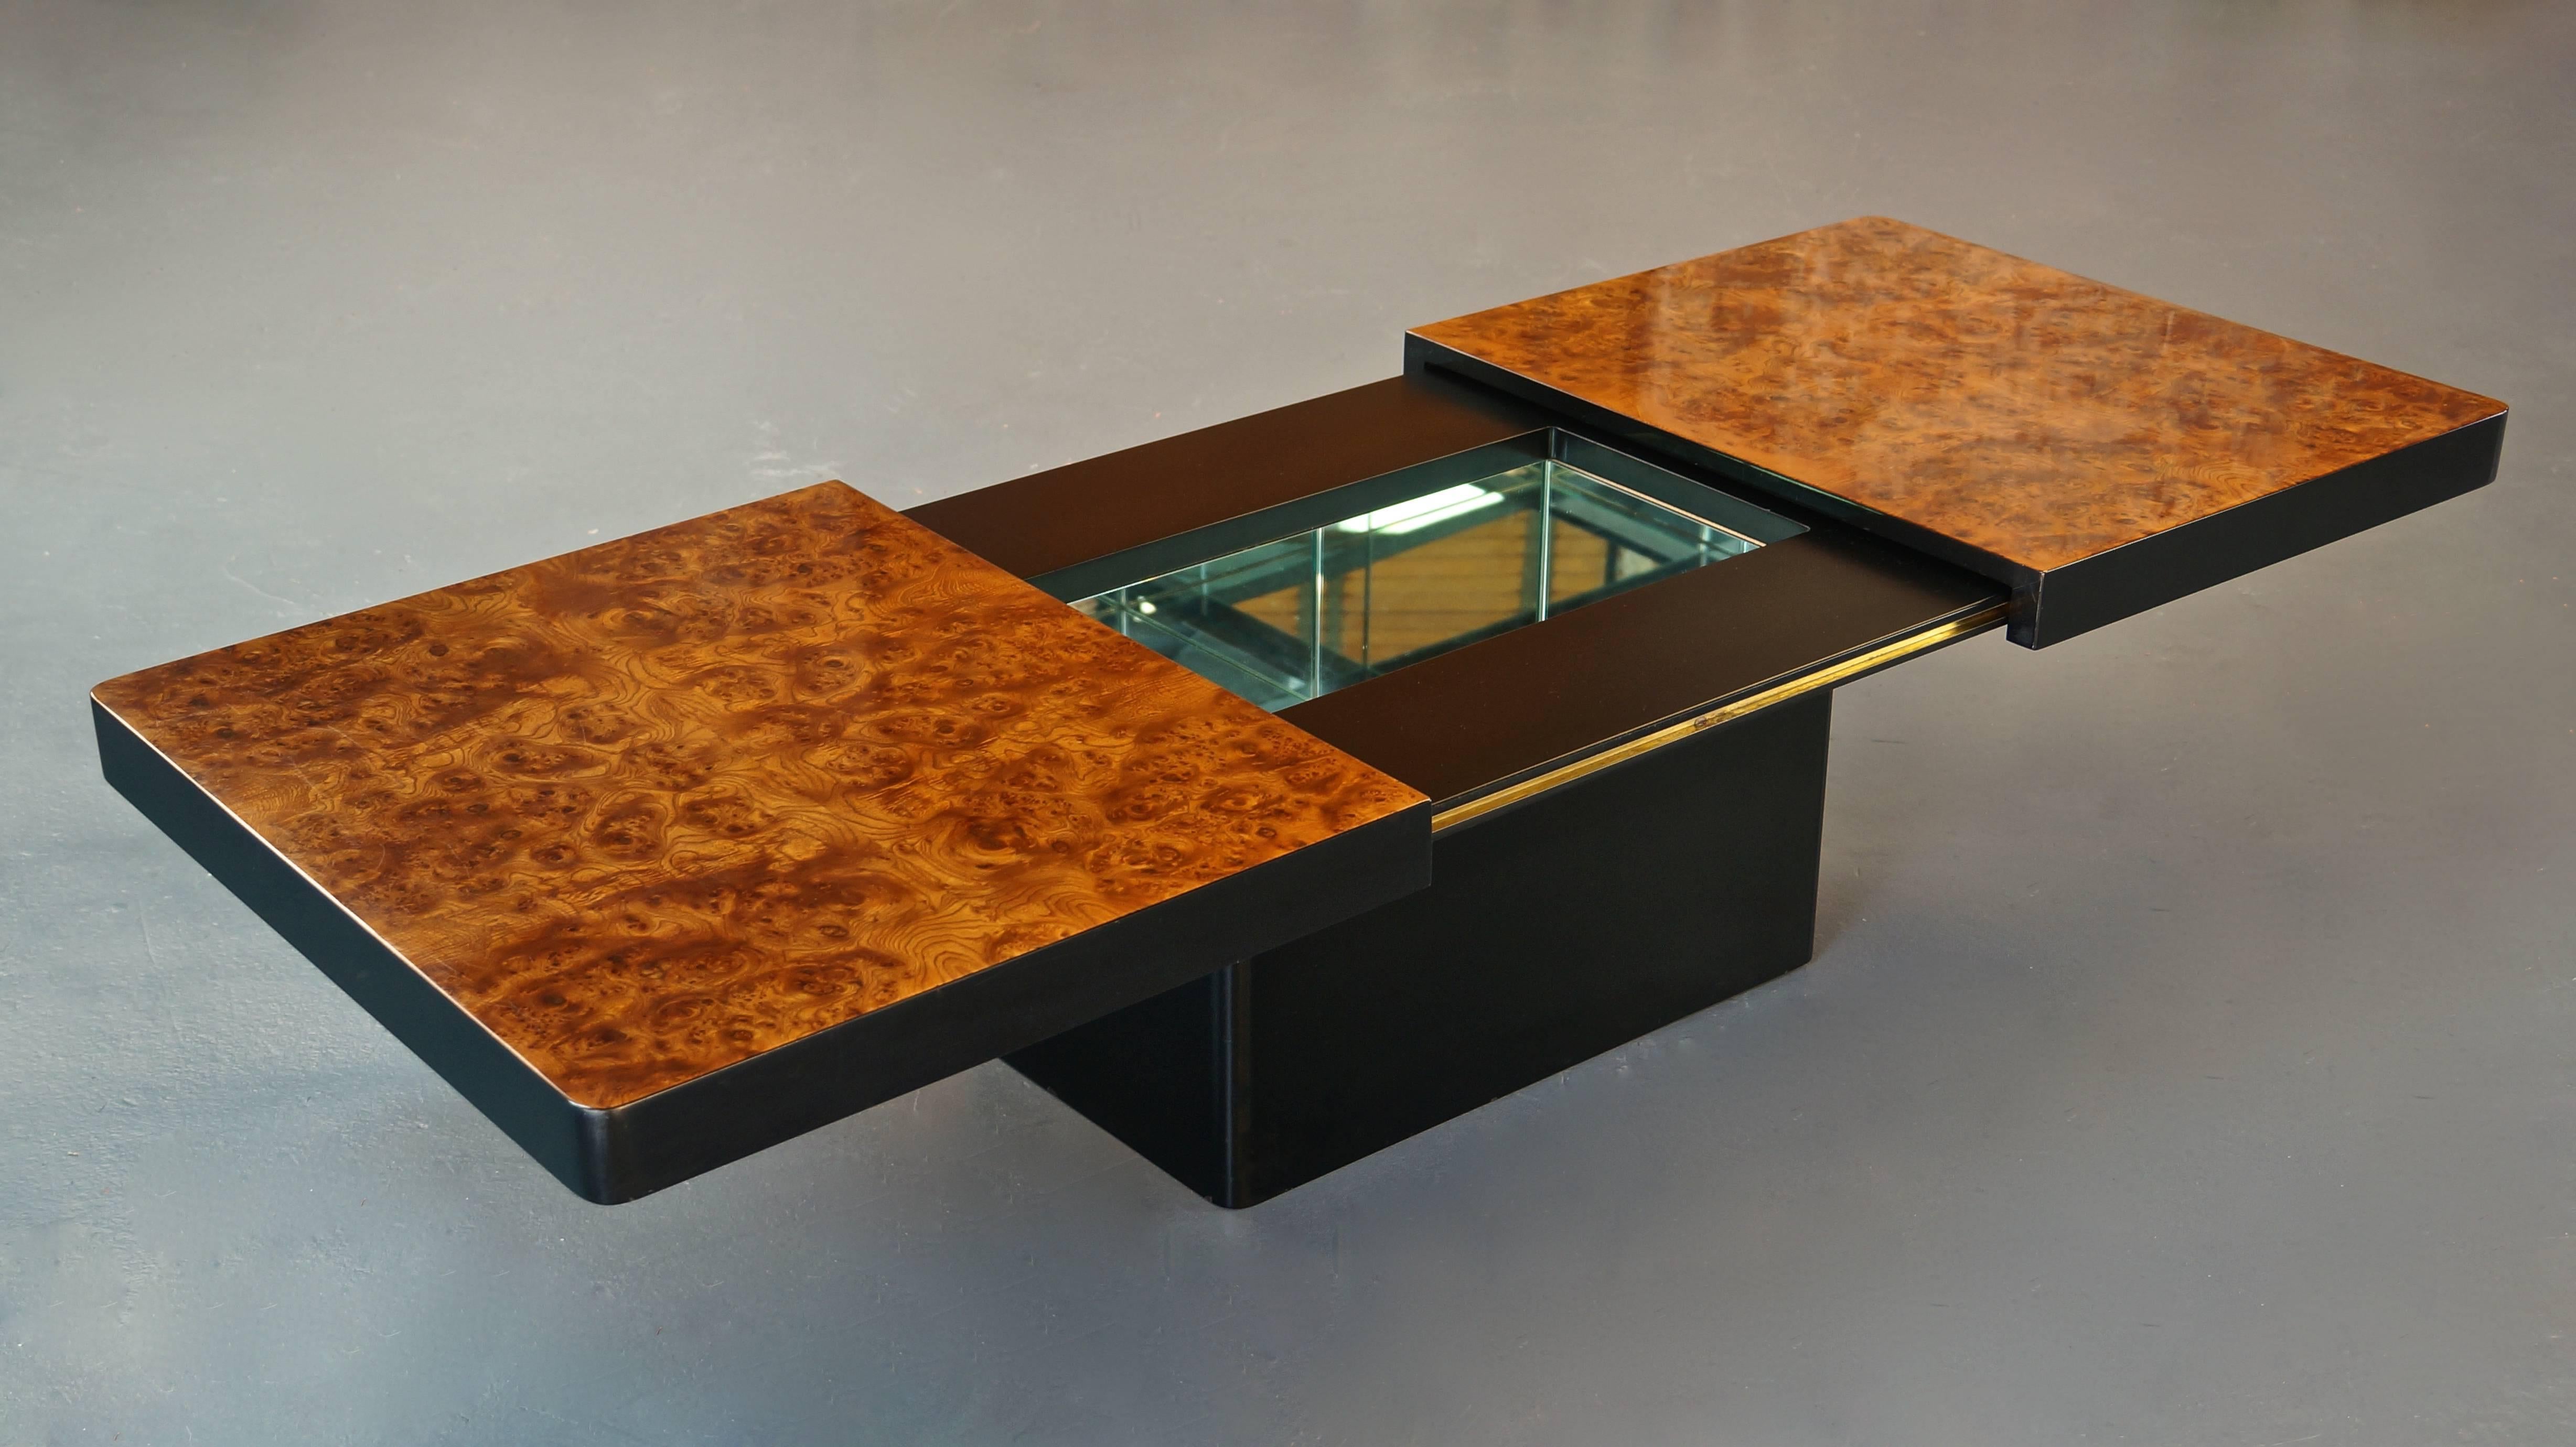 Vintage burl wood coffee table with hidden drinks bar, attributed to Willy Rizzo.